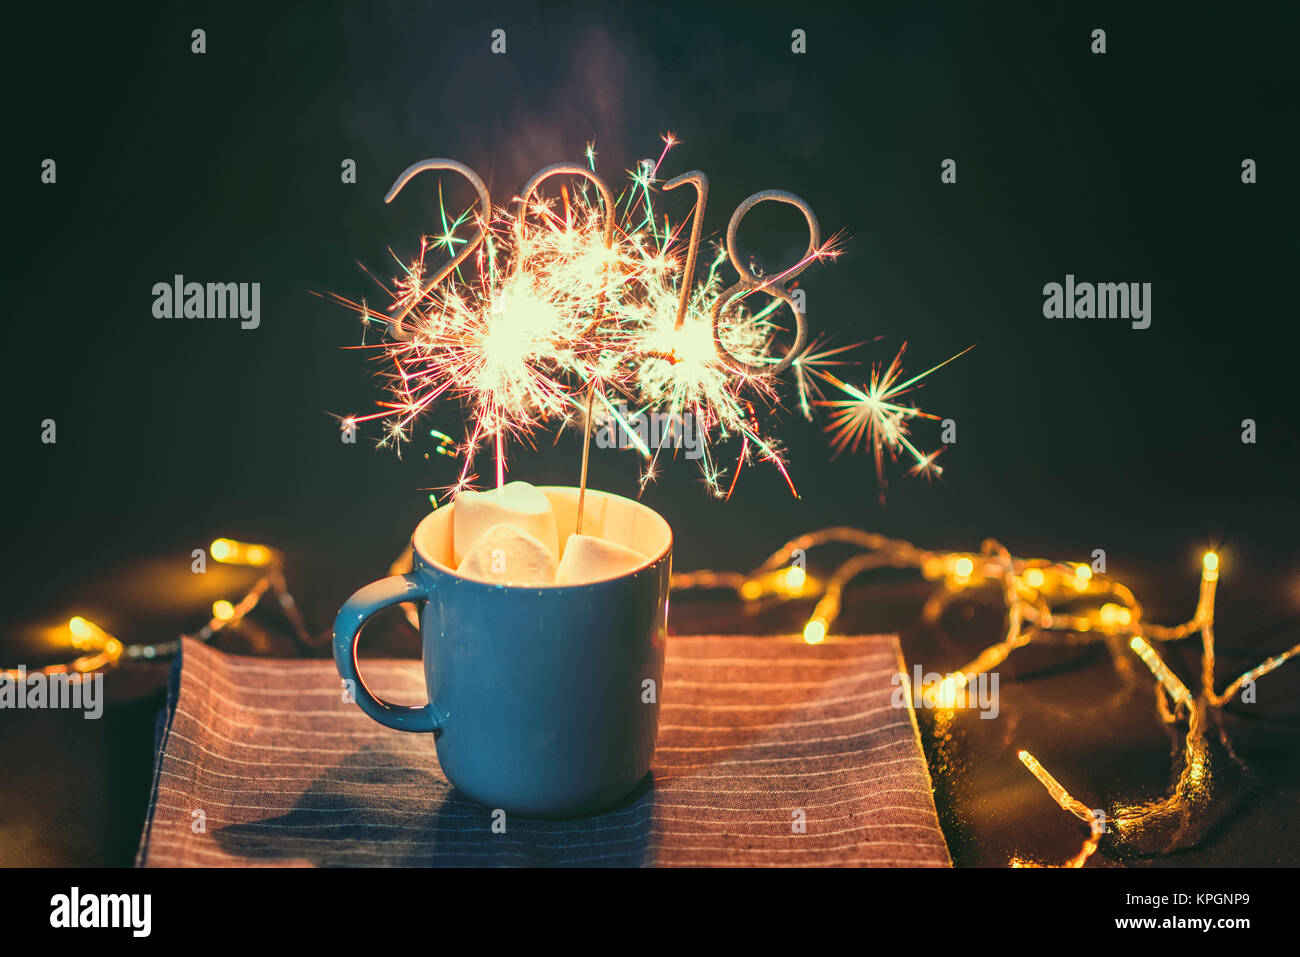 2018 Shaped Sparkler igniting in Cup with Marshmallows on outdoor table Stock Photo